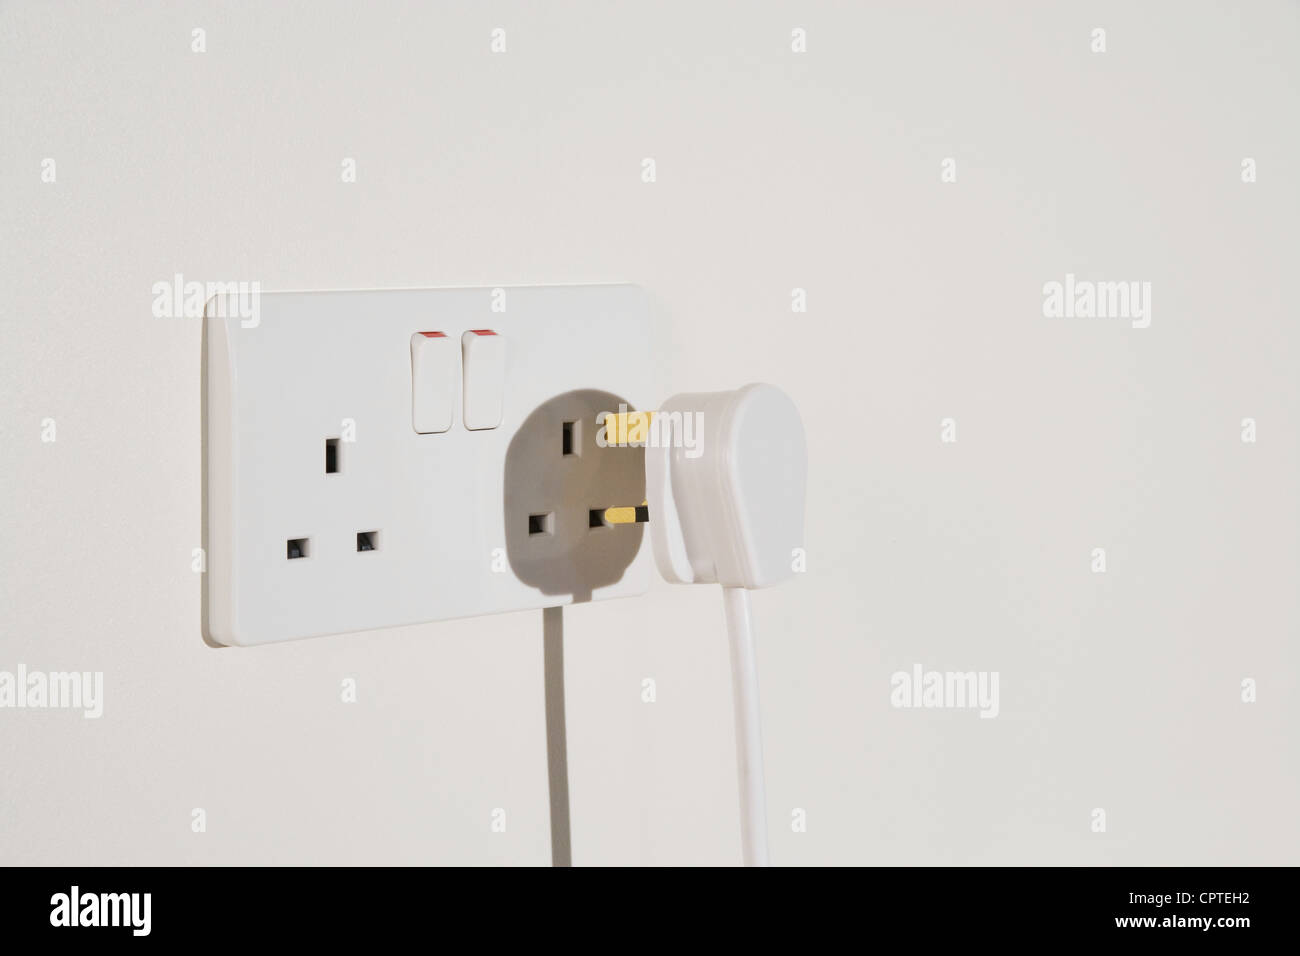 Electrical socket and plug Stock Photo